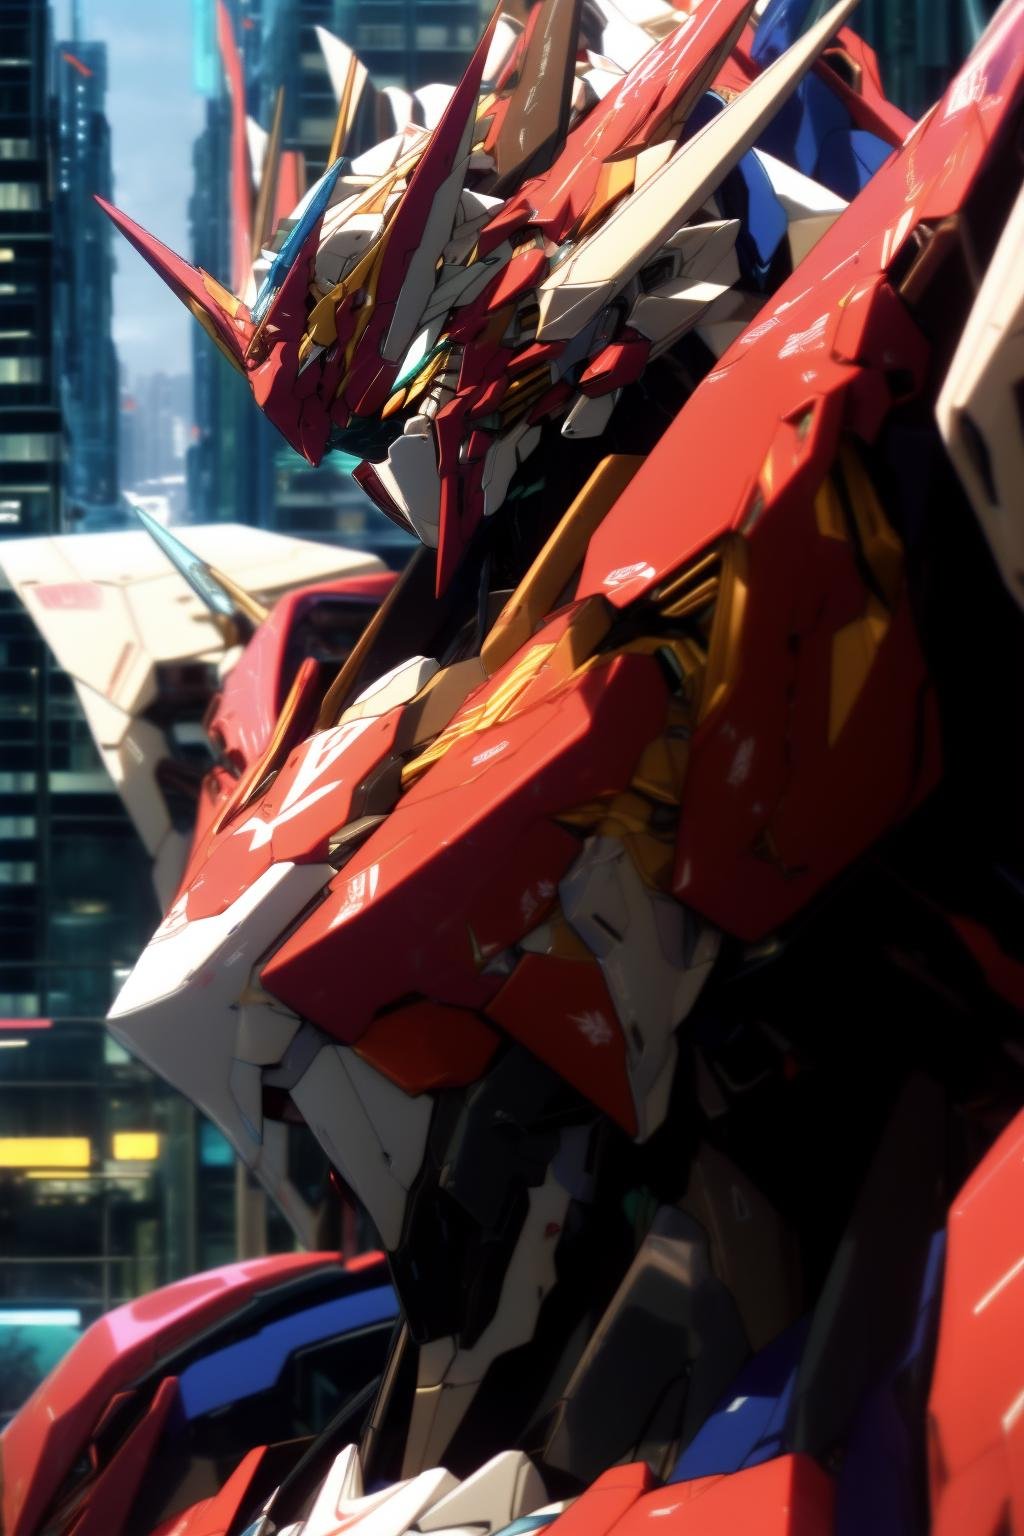 ((Best quality)), ((masterpiece)), (highly detailed:1.3), 3D, beautiful, (cyberpunk:1.2),a close up of a robot with a gun in a city, anime mecha aesthetic, best anime 4k konachan wallpaper, mecha asthetic, ethereal and mecha theme, anime robotic mixed with organic, mechanized valkyrie girl, female mecha, streamlined white armor, cool mecha style, modern mecha anime, cyberpunk anime girl mech, <lora:srd_v3_5d:0.8>